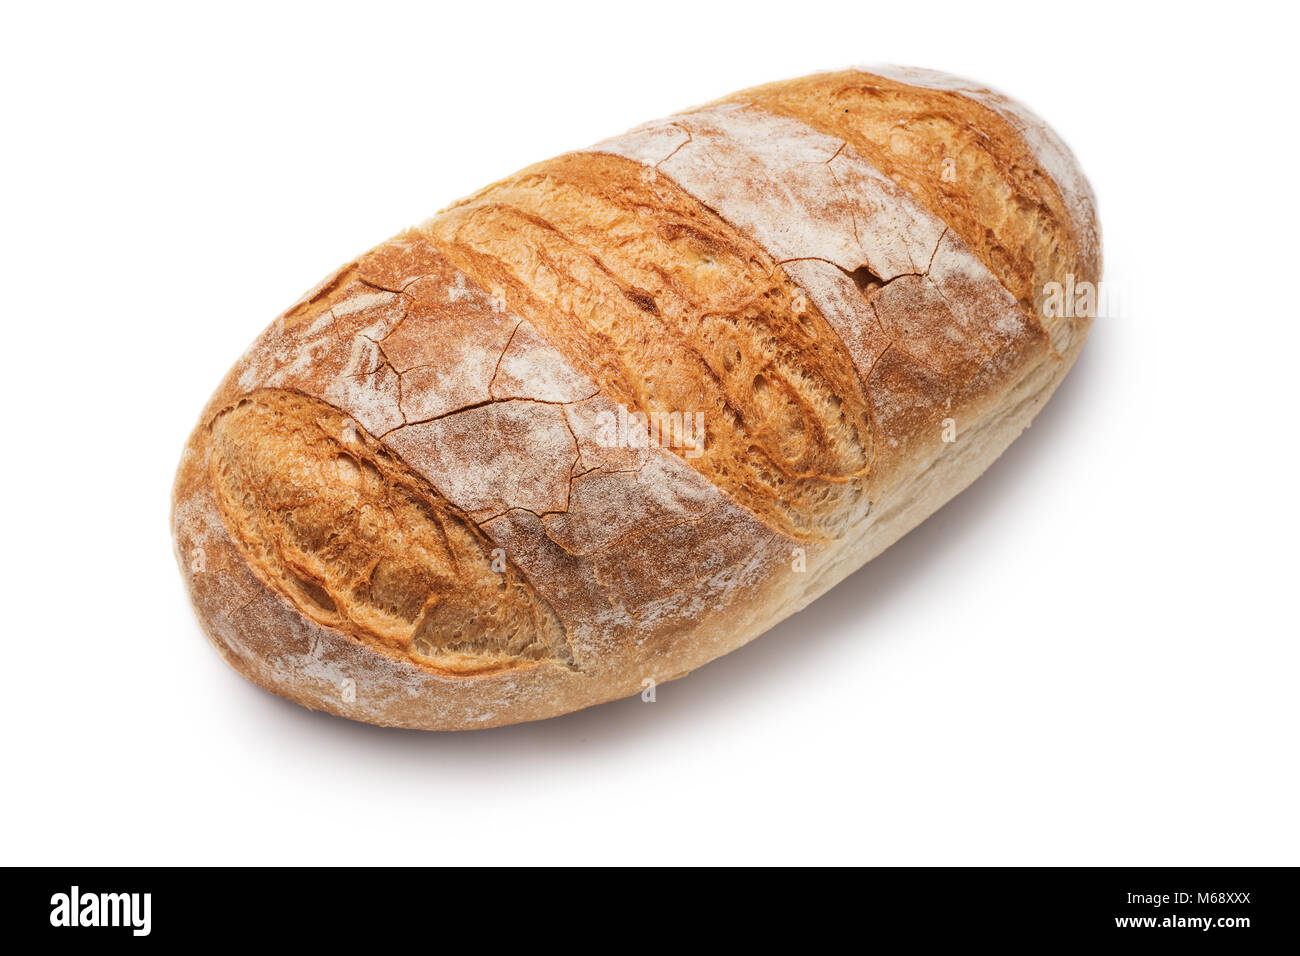 Home made bread isolated on white background Stock Photo